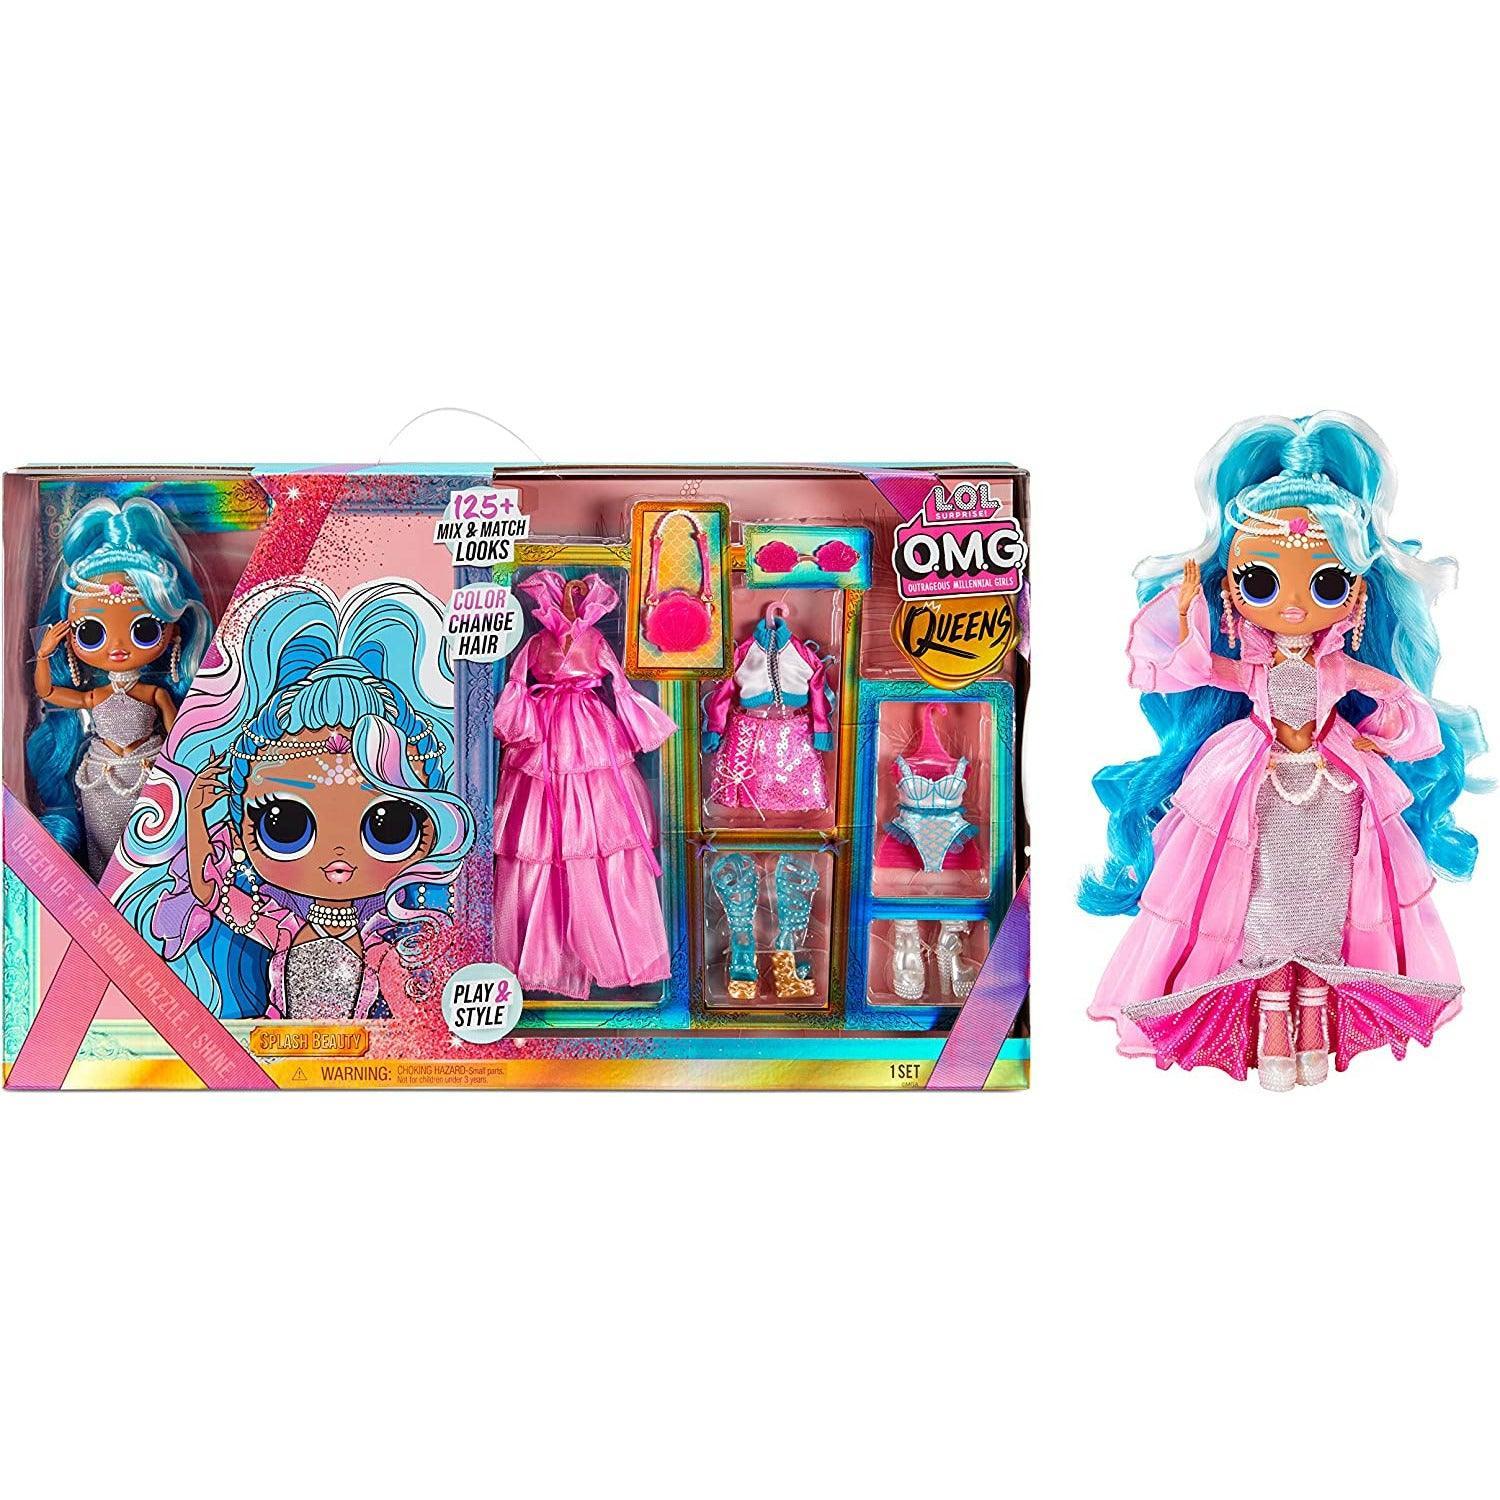 LOL Surprise OMG Queens Splash Beauty Fashion Doll with 125+ Mix and Match Fashion Looks Including Outfits and Accessories 10-inch Doll - BumbleToys - 5-7 Years, Dolls, Fashion Dolls & Accessories, Girls, L.O.L